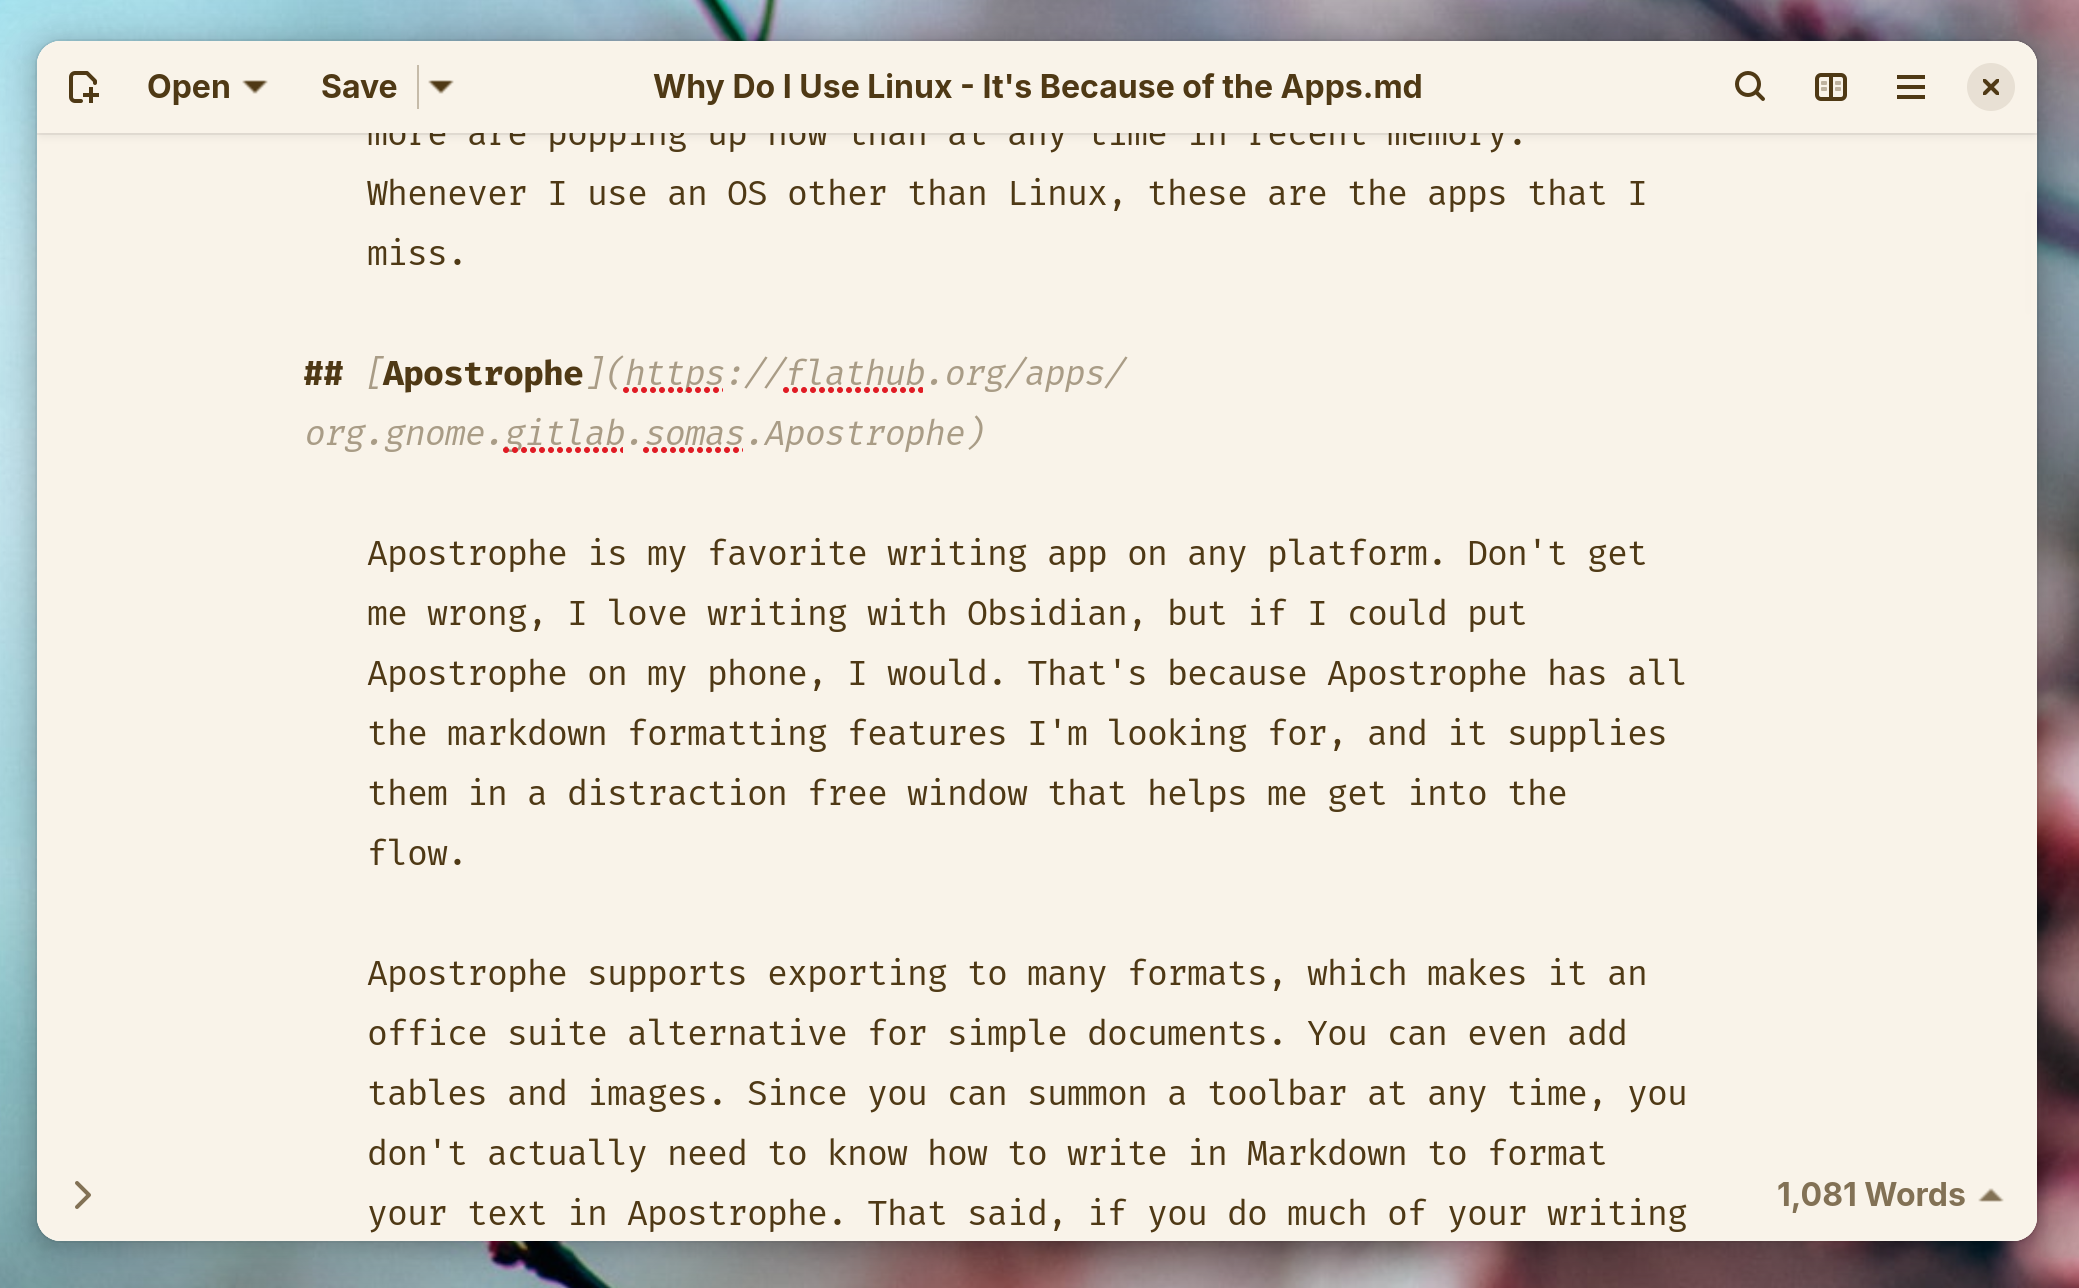 Apostrophe markdown app for Linux.